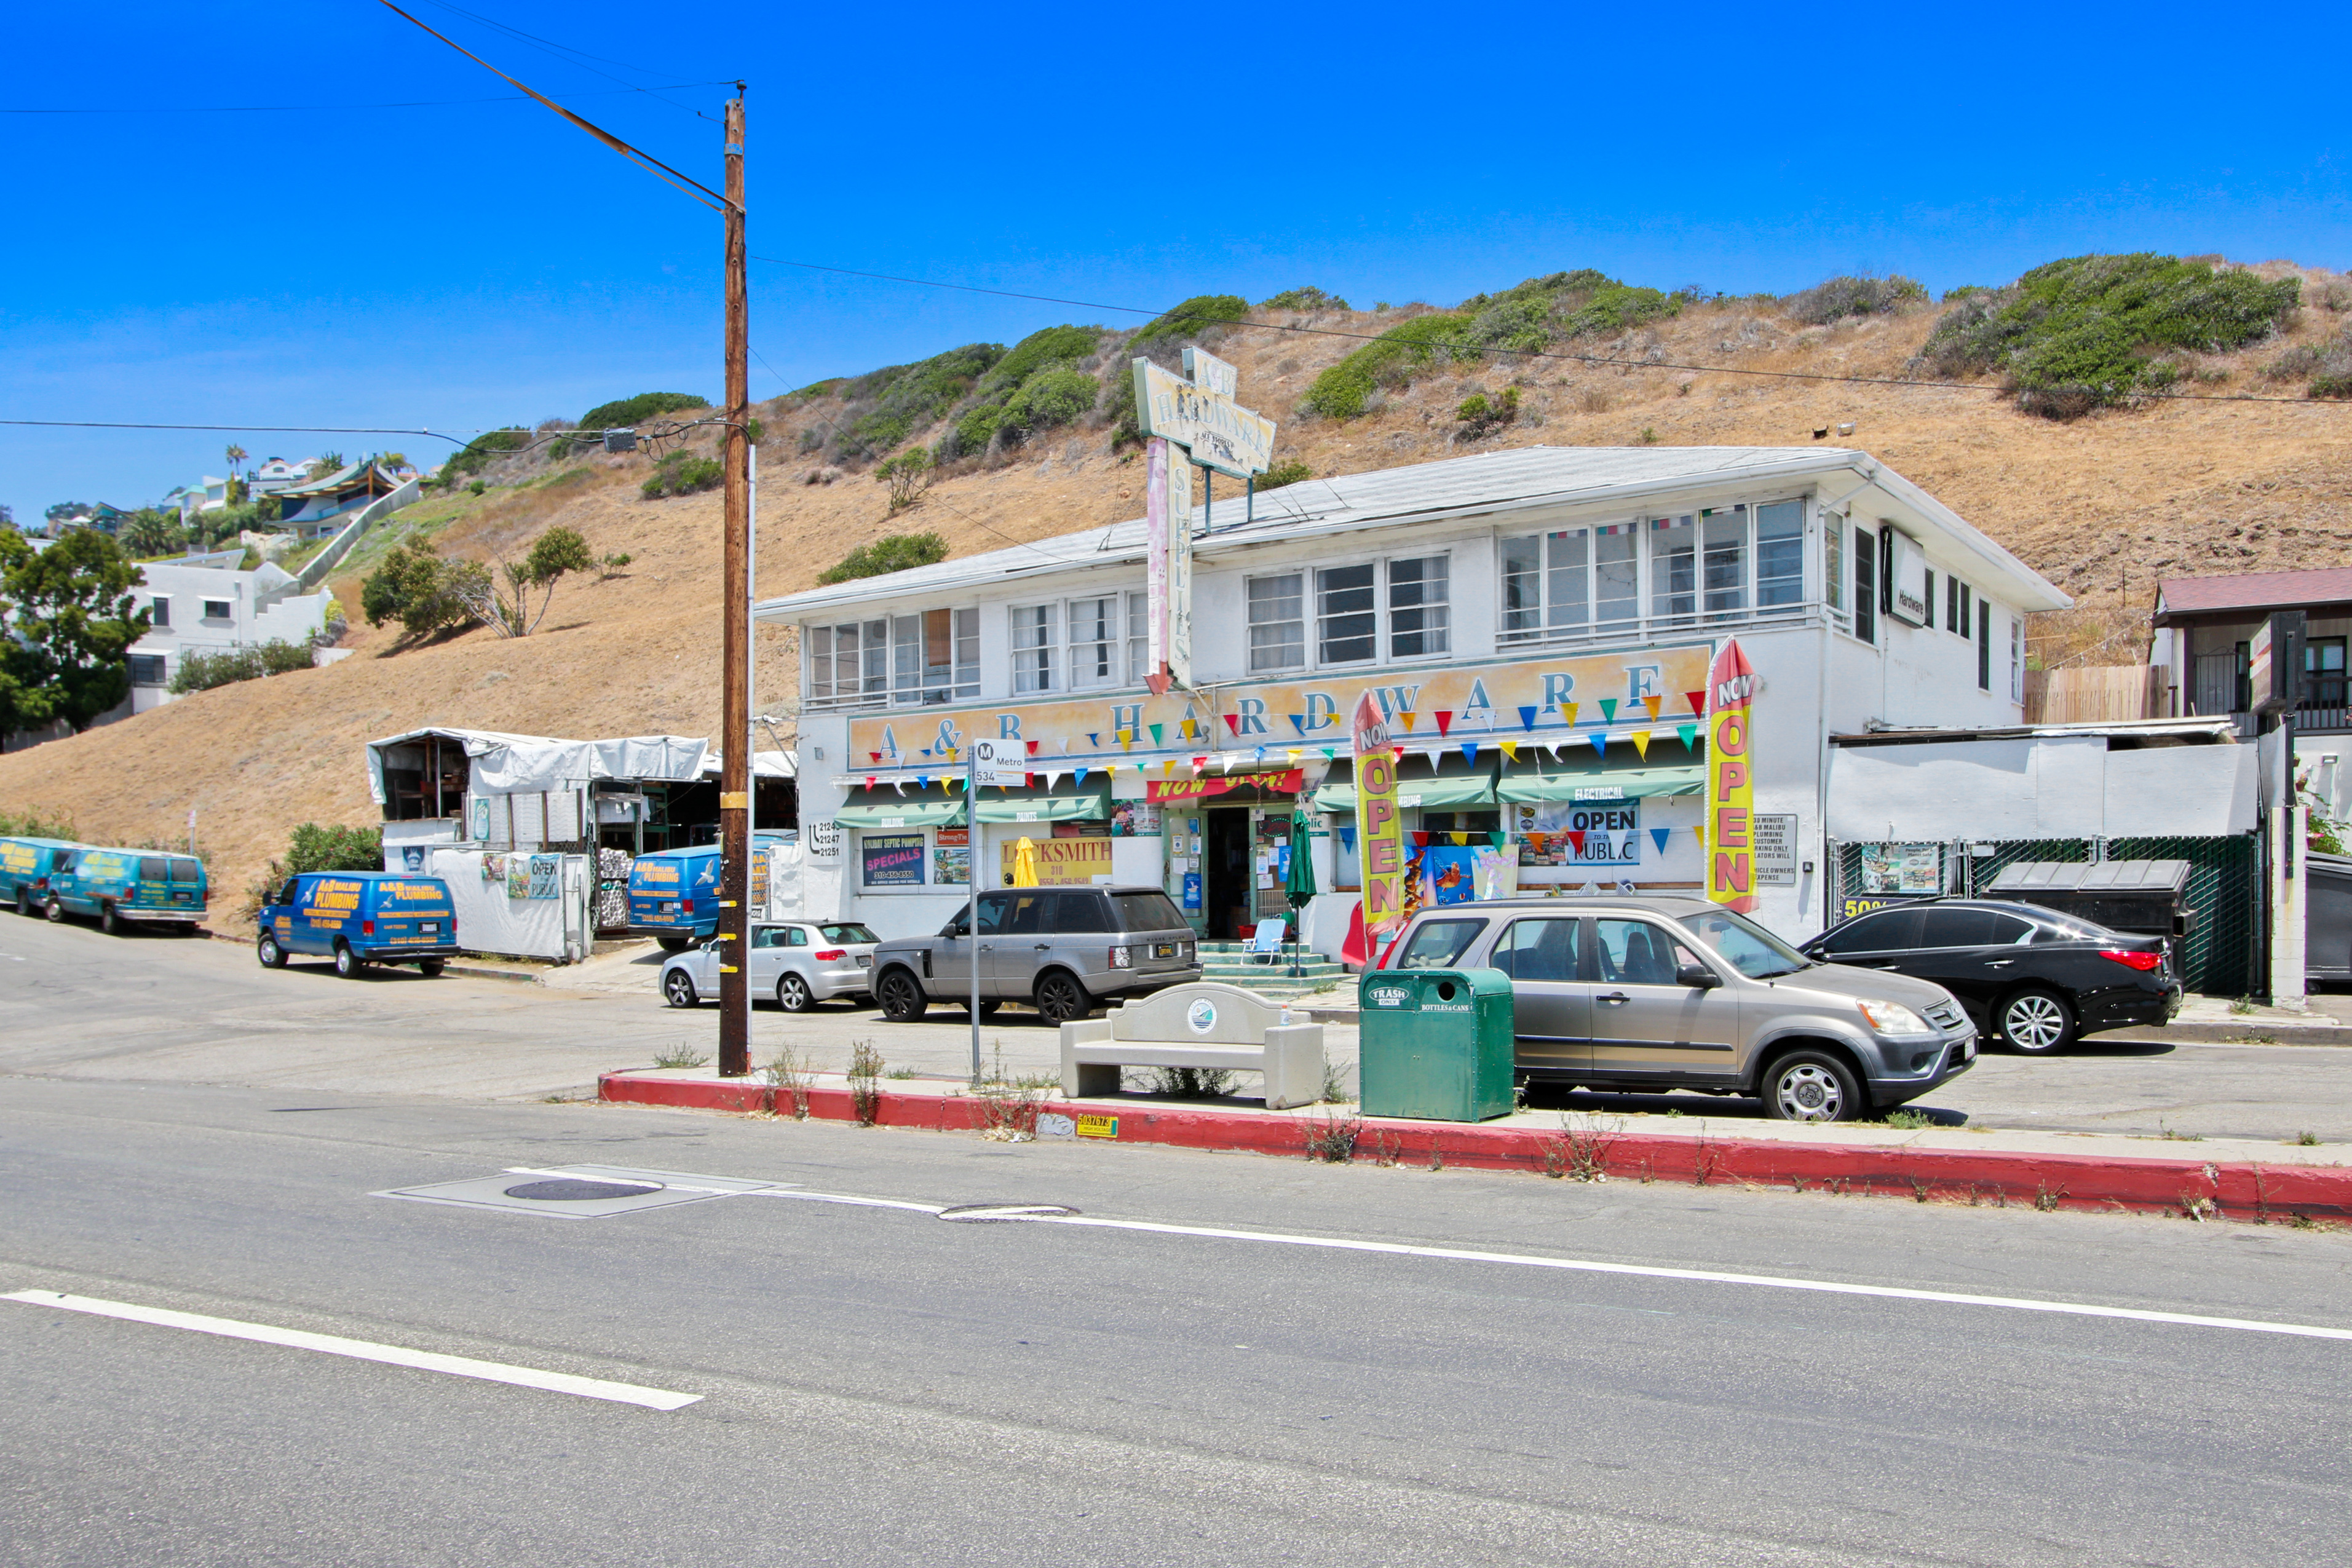 New Listing For Sale – Investor Opportunity – Two story mixed use Commercial Building – All tenants are MTM – Located in the rarely traded Malibu, CA.